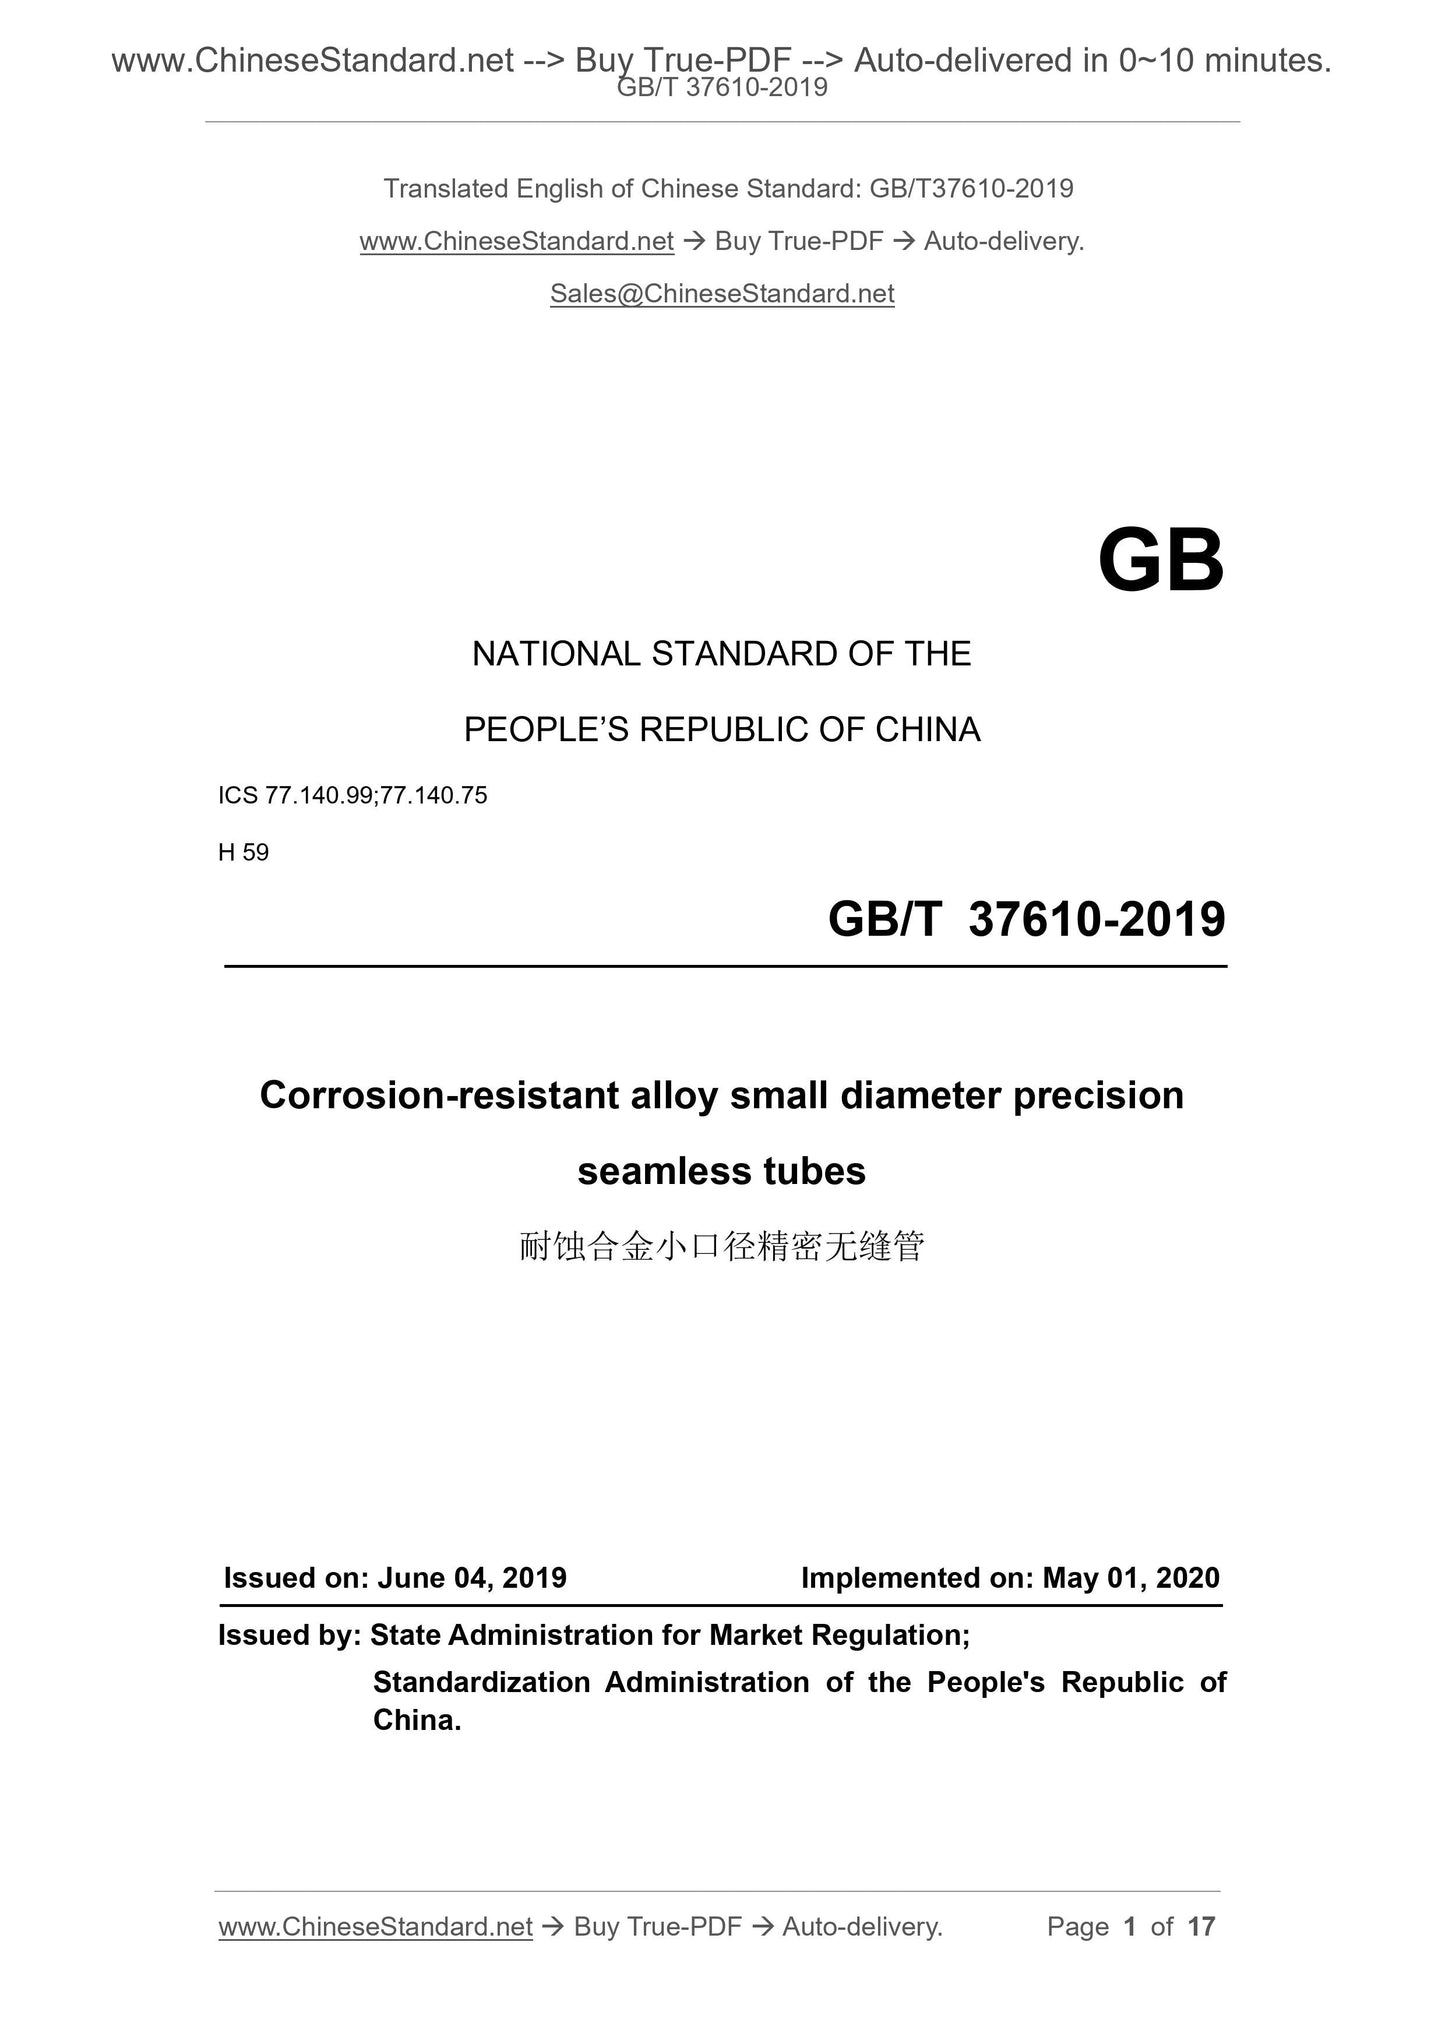 GB/T 37610-2019 Page 1